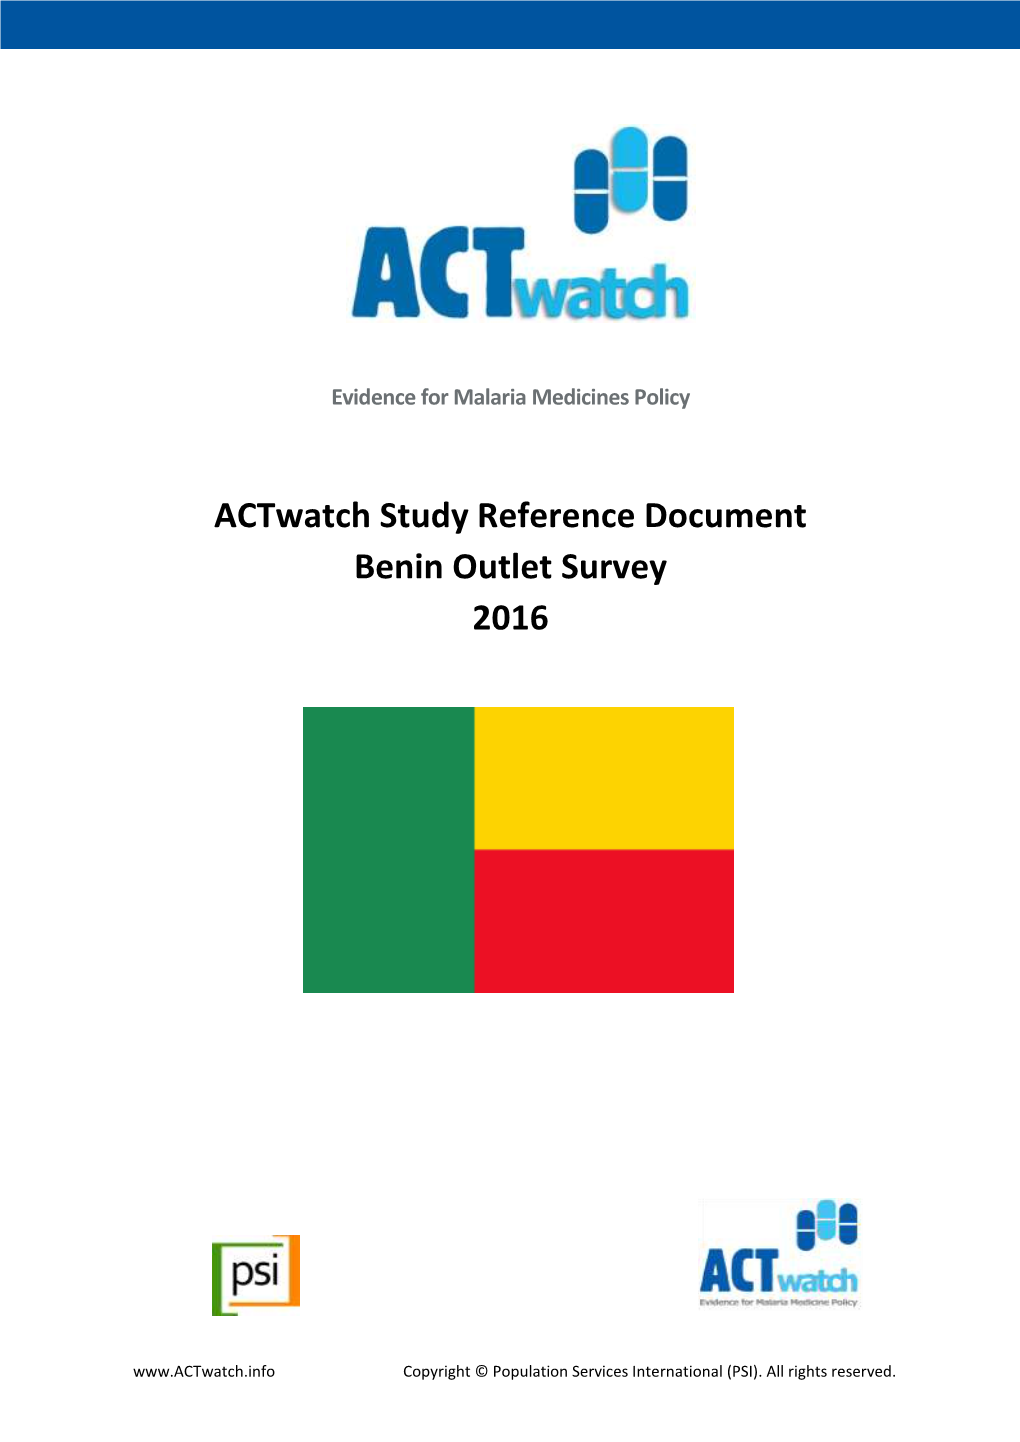 Actwatch Study Reference Document Benin Outlet Survey 2016